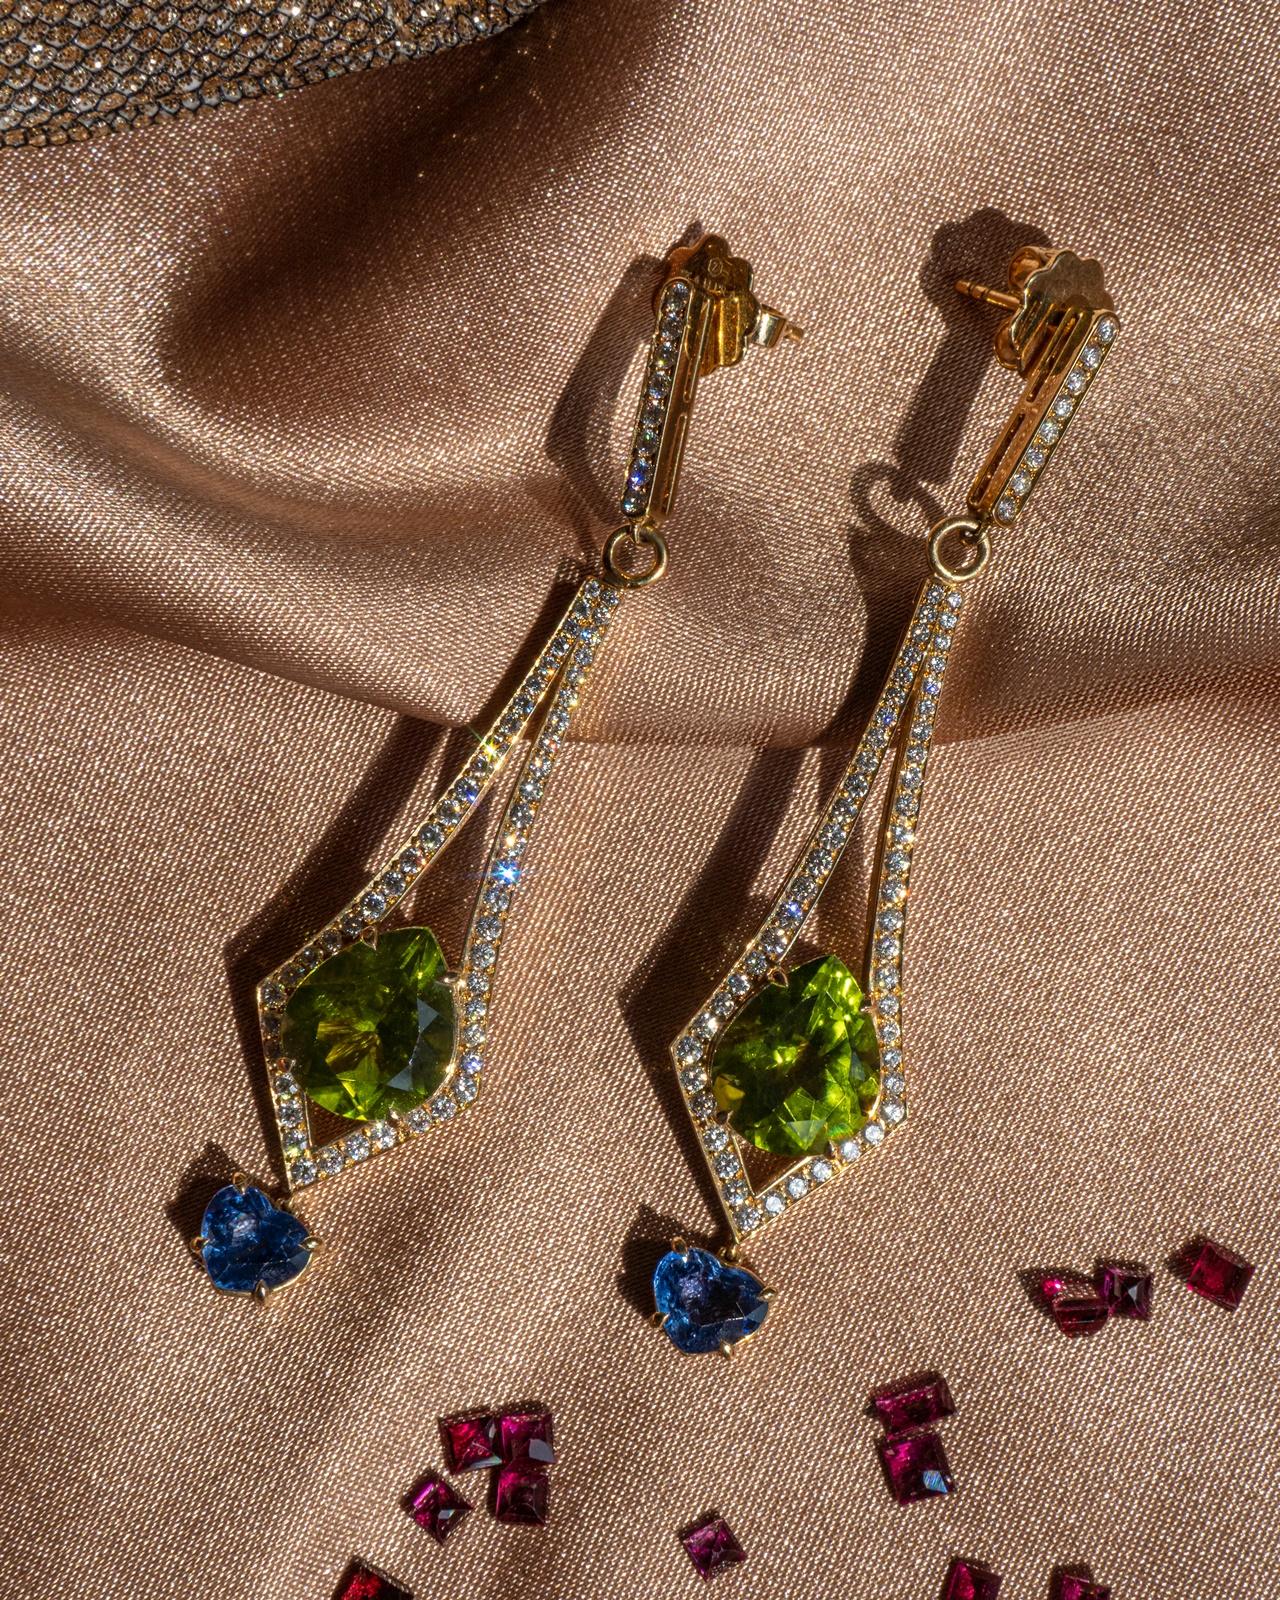 8.57 Carat Peridot and 2.26 Carat Blue Sapphire and Diamond Earrings in 18K Gold 3